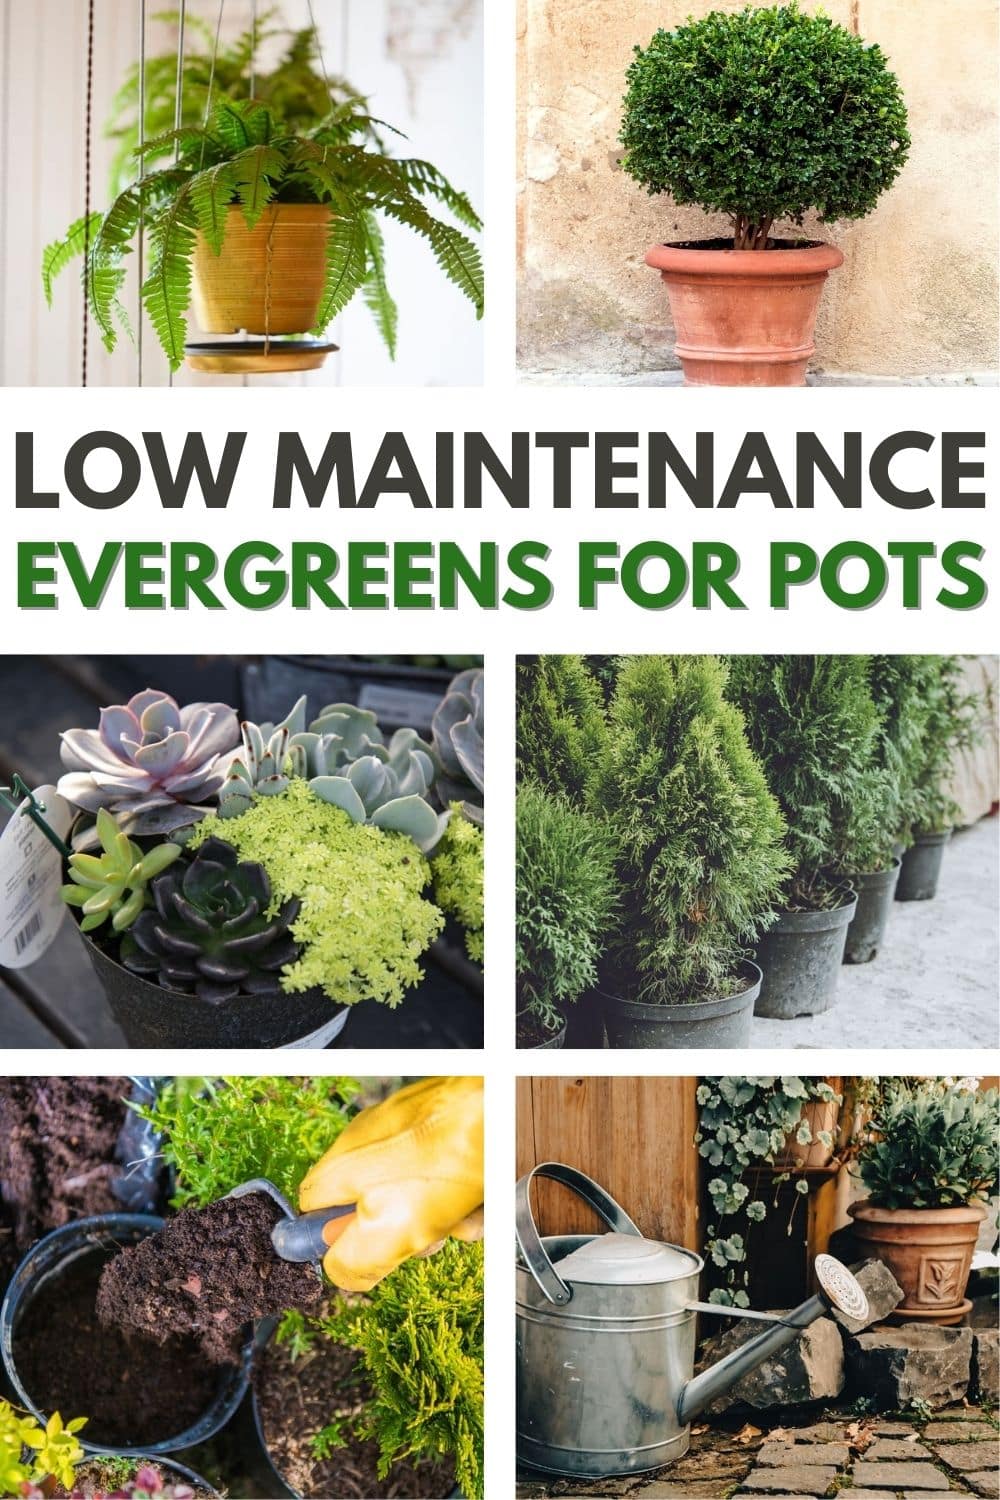 If you're looking for an easy way to add year-round greenery, then these low maintenance evergreen plants for pots are just what you need.  #lowmaintenanceevergreenplantsforpots #lowmaintenance #lowmaintenanceplants #evergreenplants #plantsforpots via @wondermomwannab